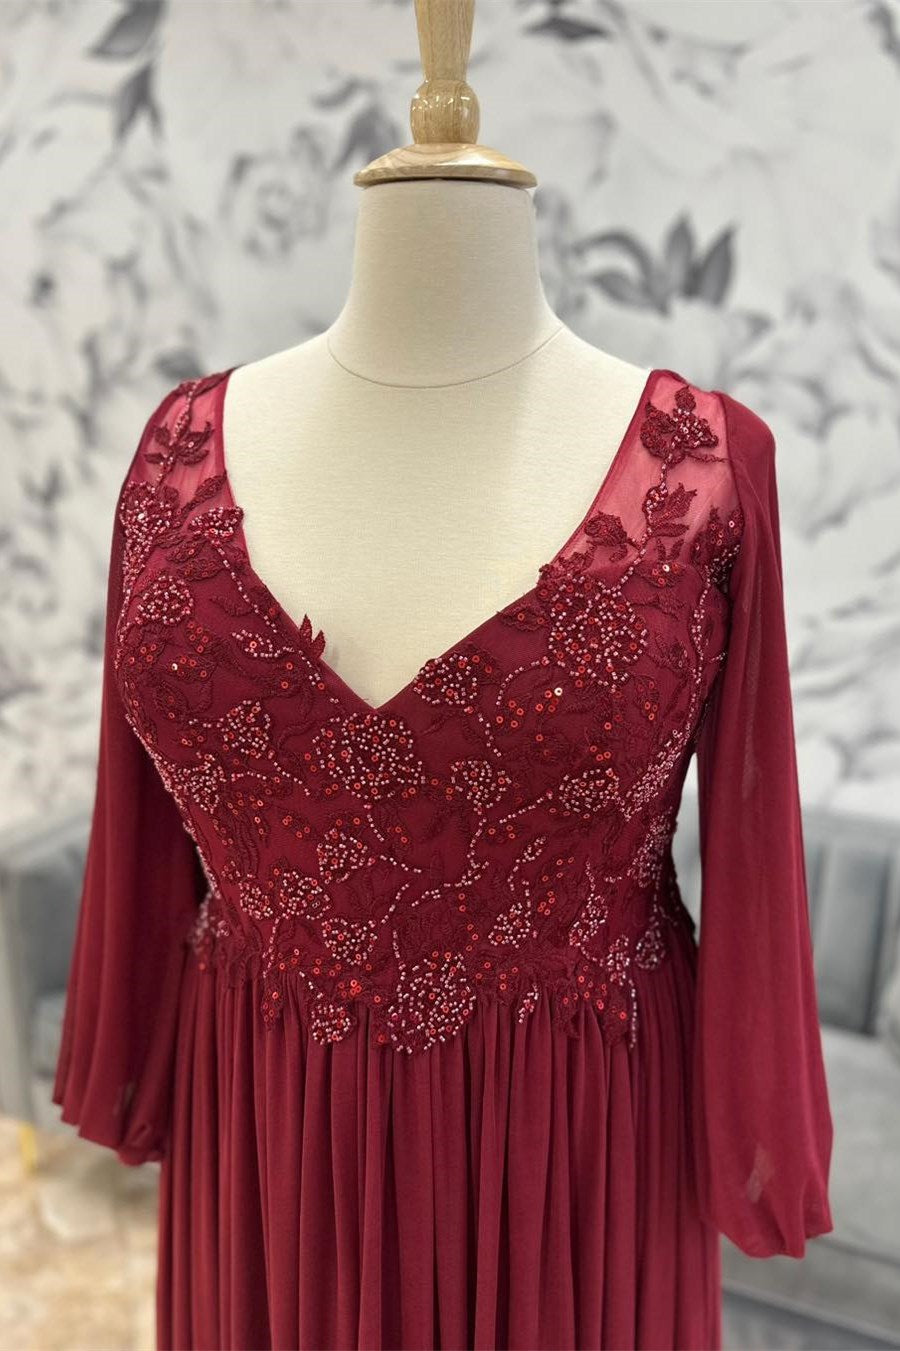 Wine Red Chiffon Appliques V-Neck Long Mother